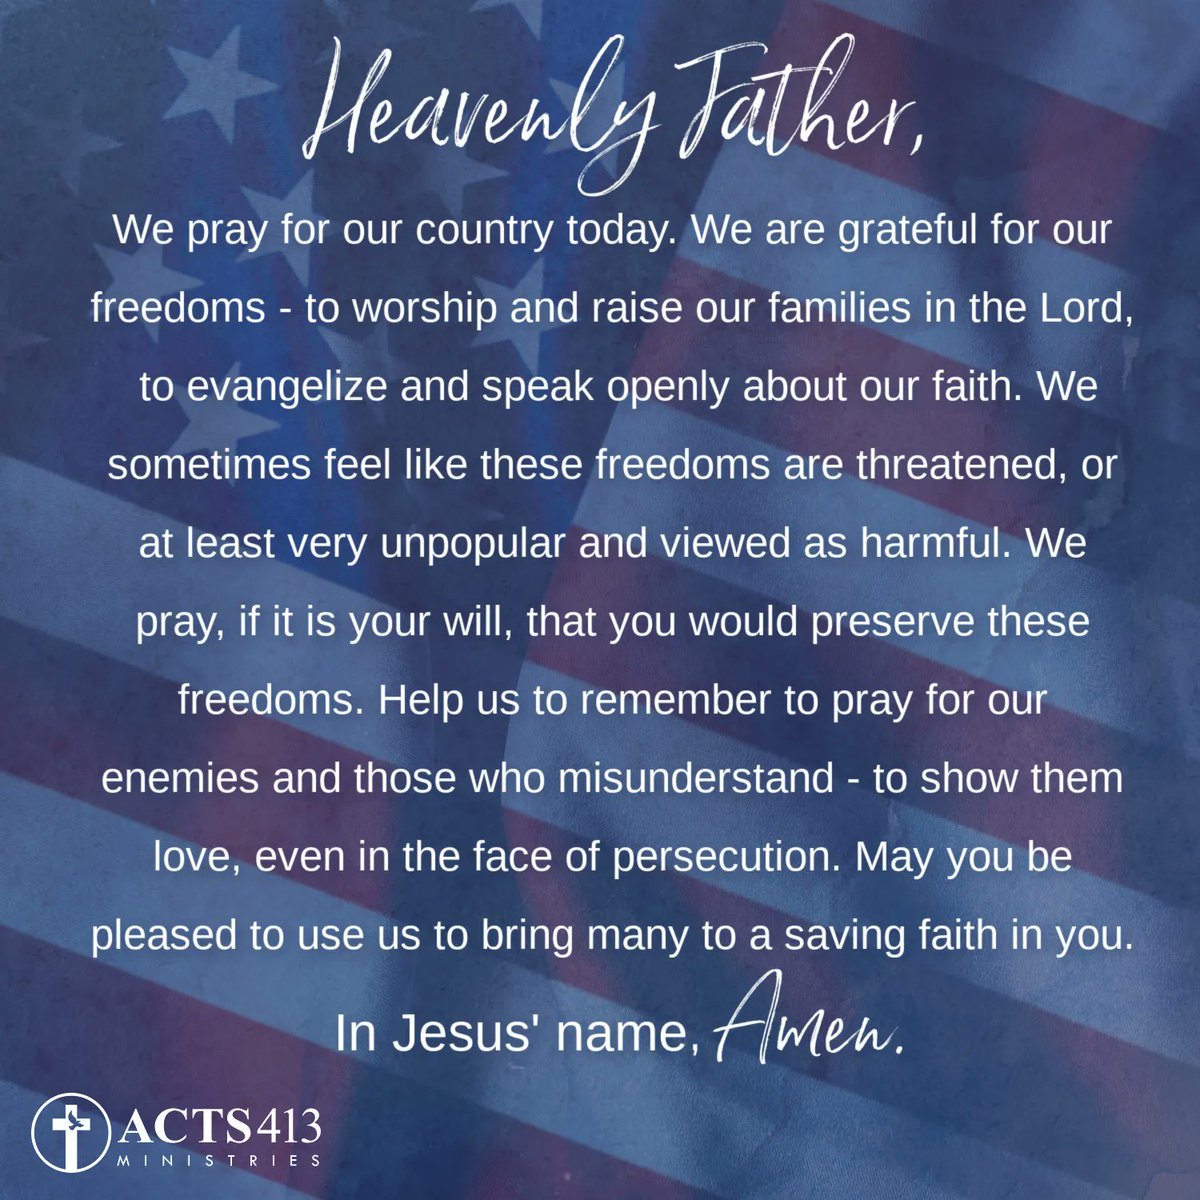 Happy Independence Day! May God bless our country!
#DailyVerse #July4th #PrayforUSA